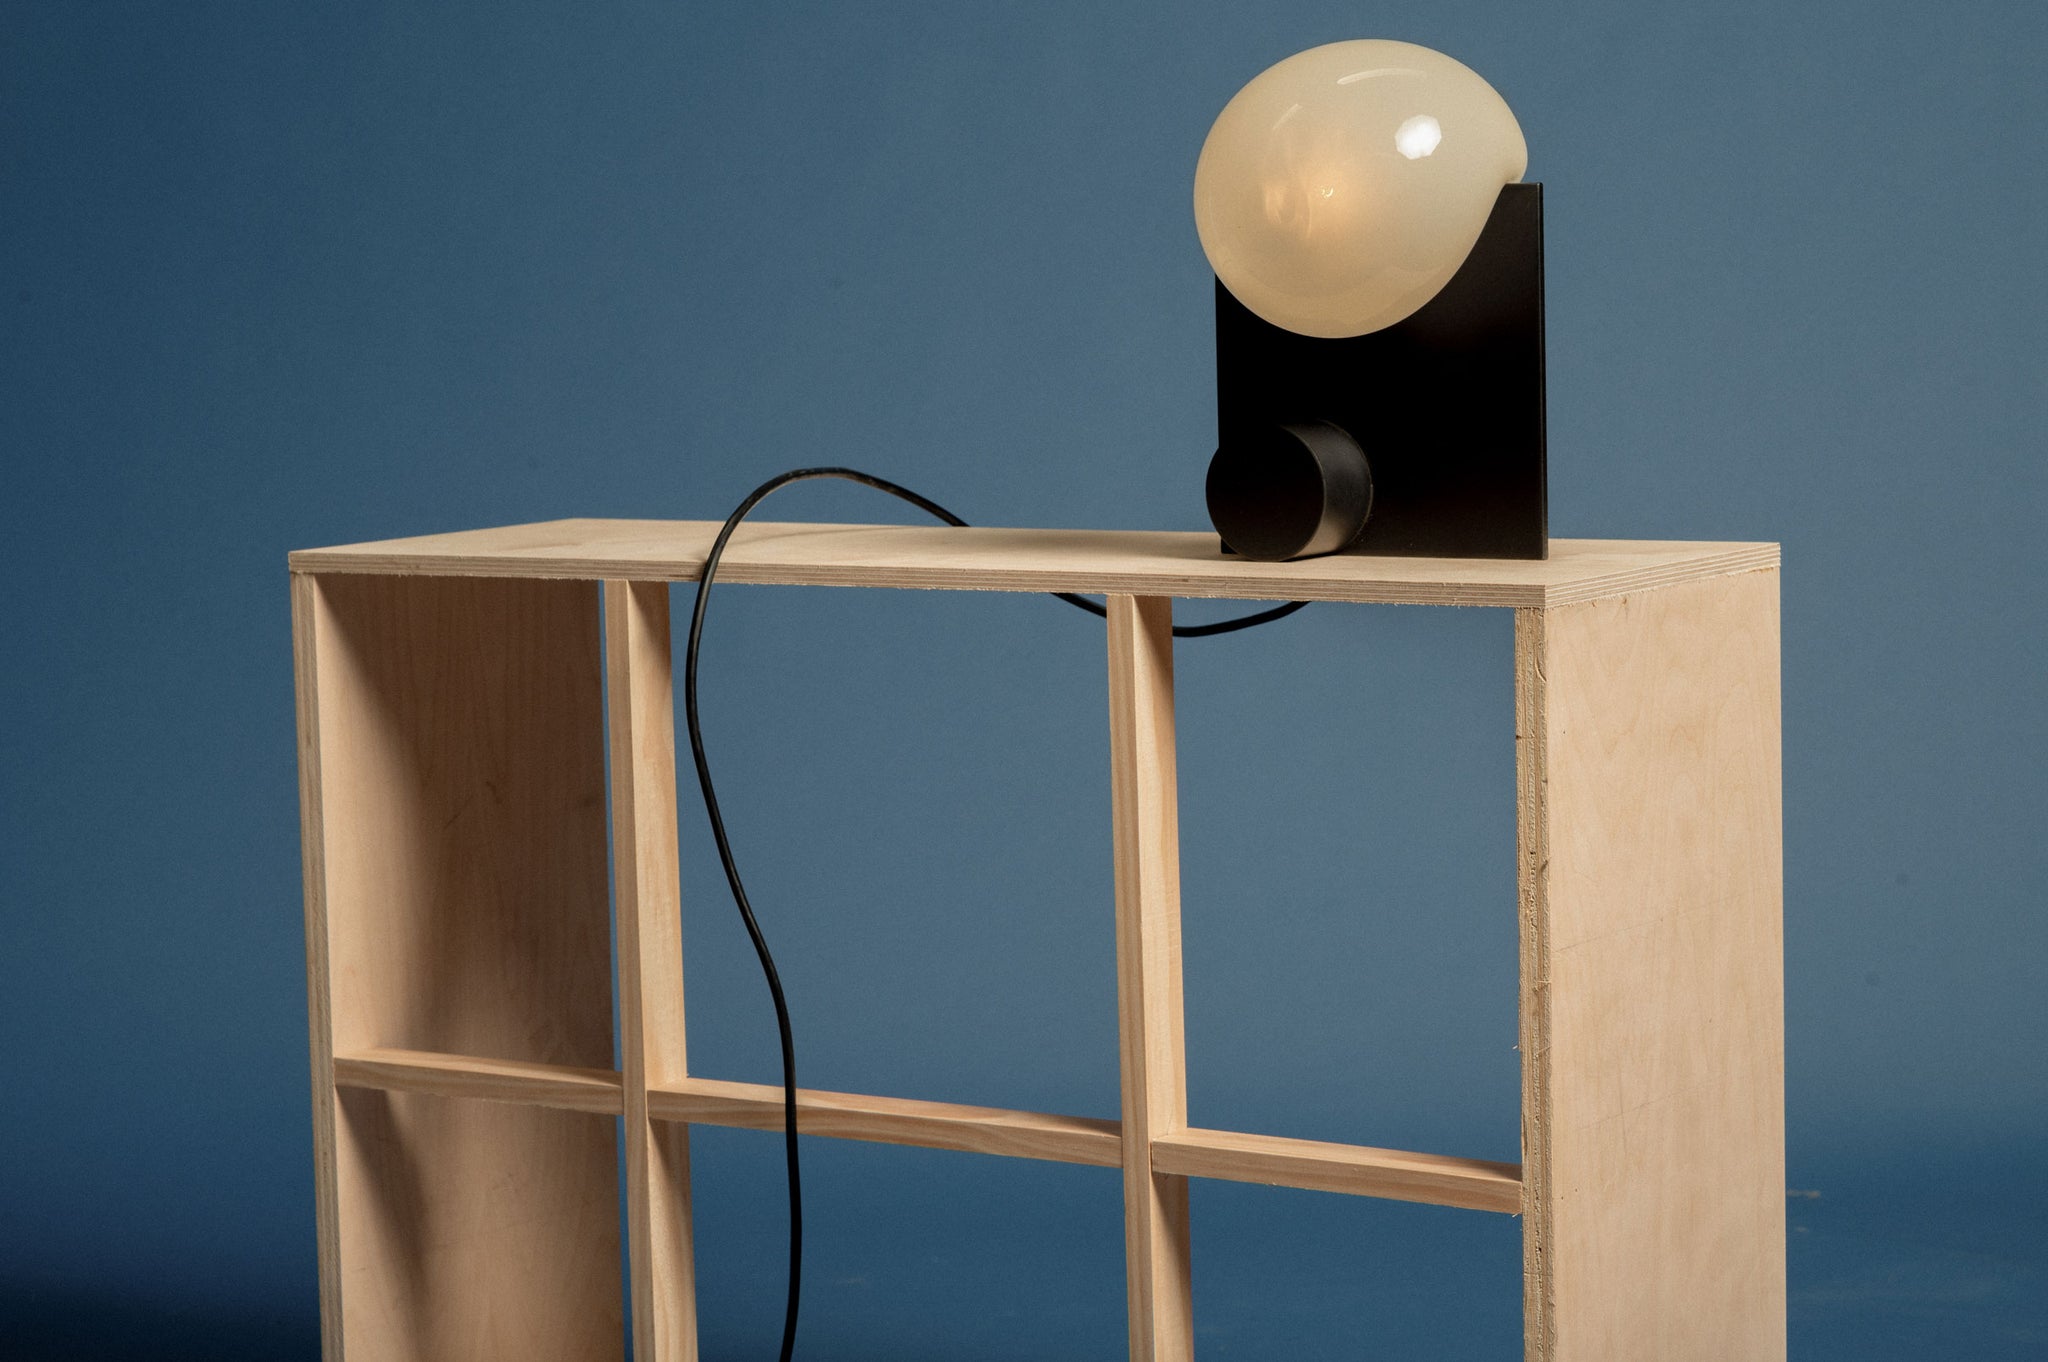 Bloop Table Lamp set on a ply-wood shelf on a blue backdrop